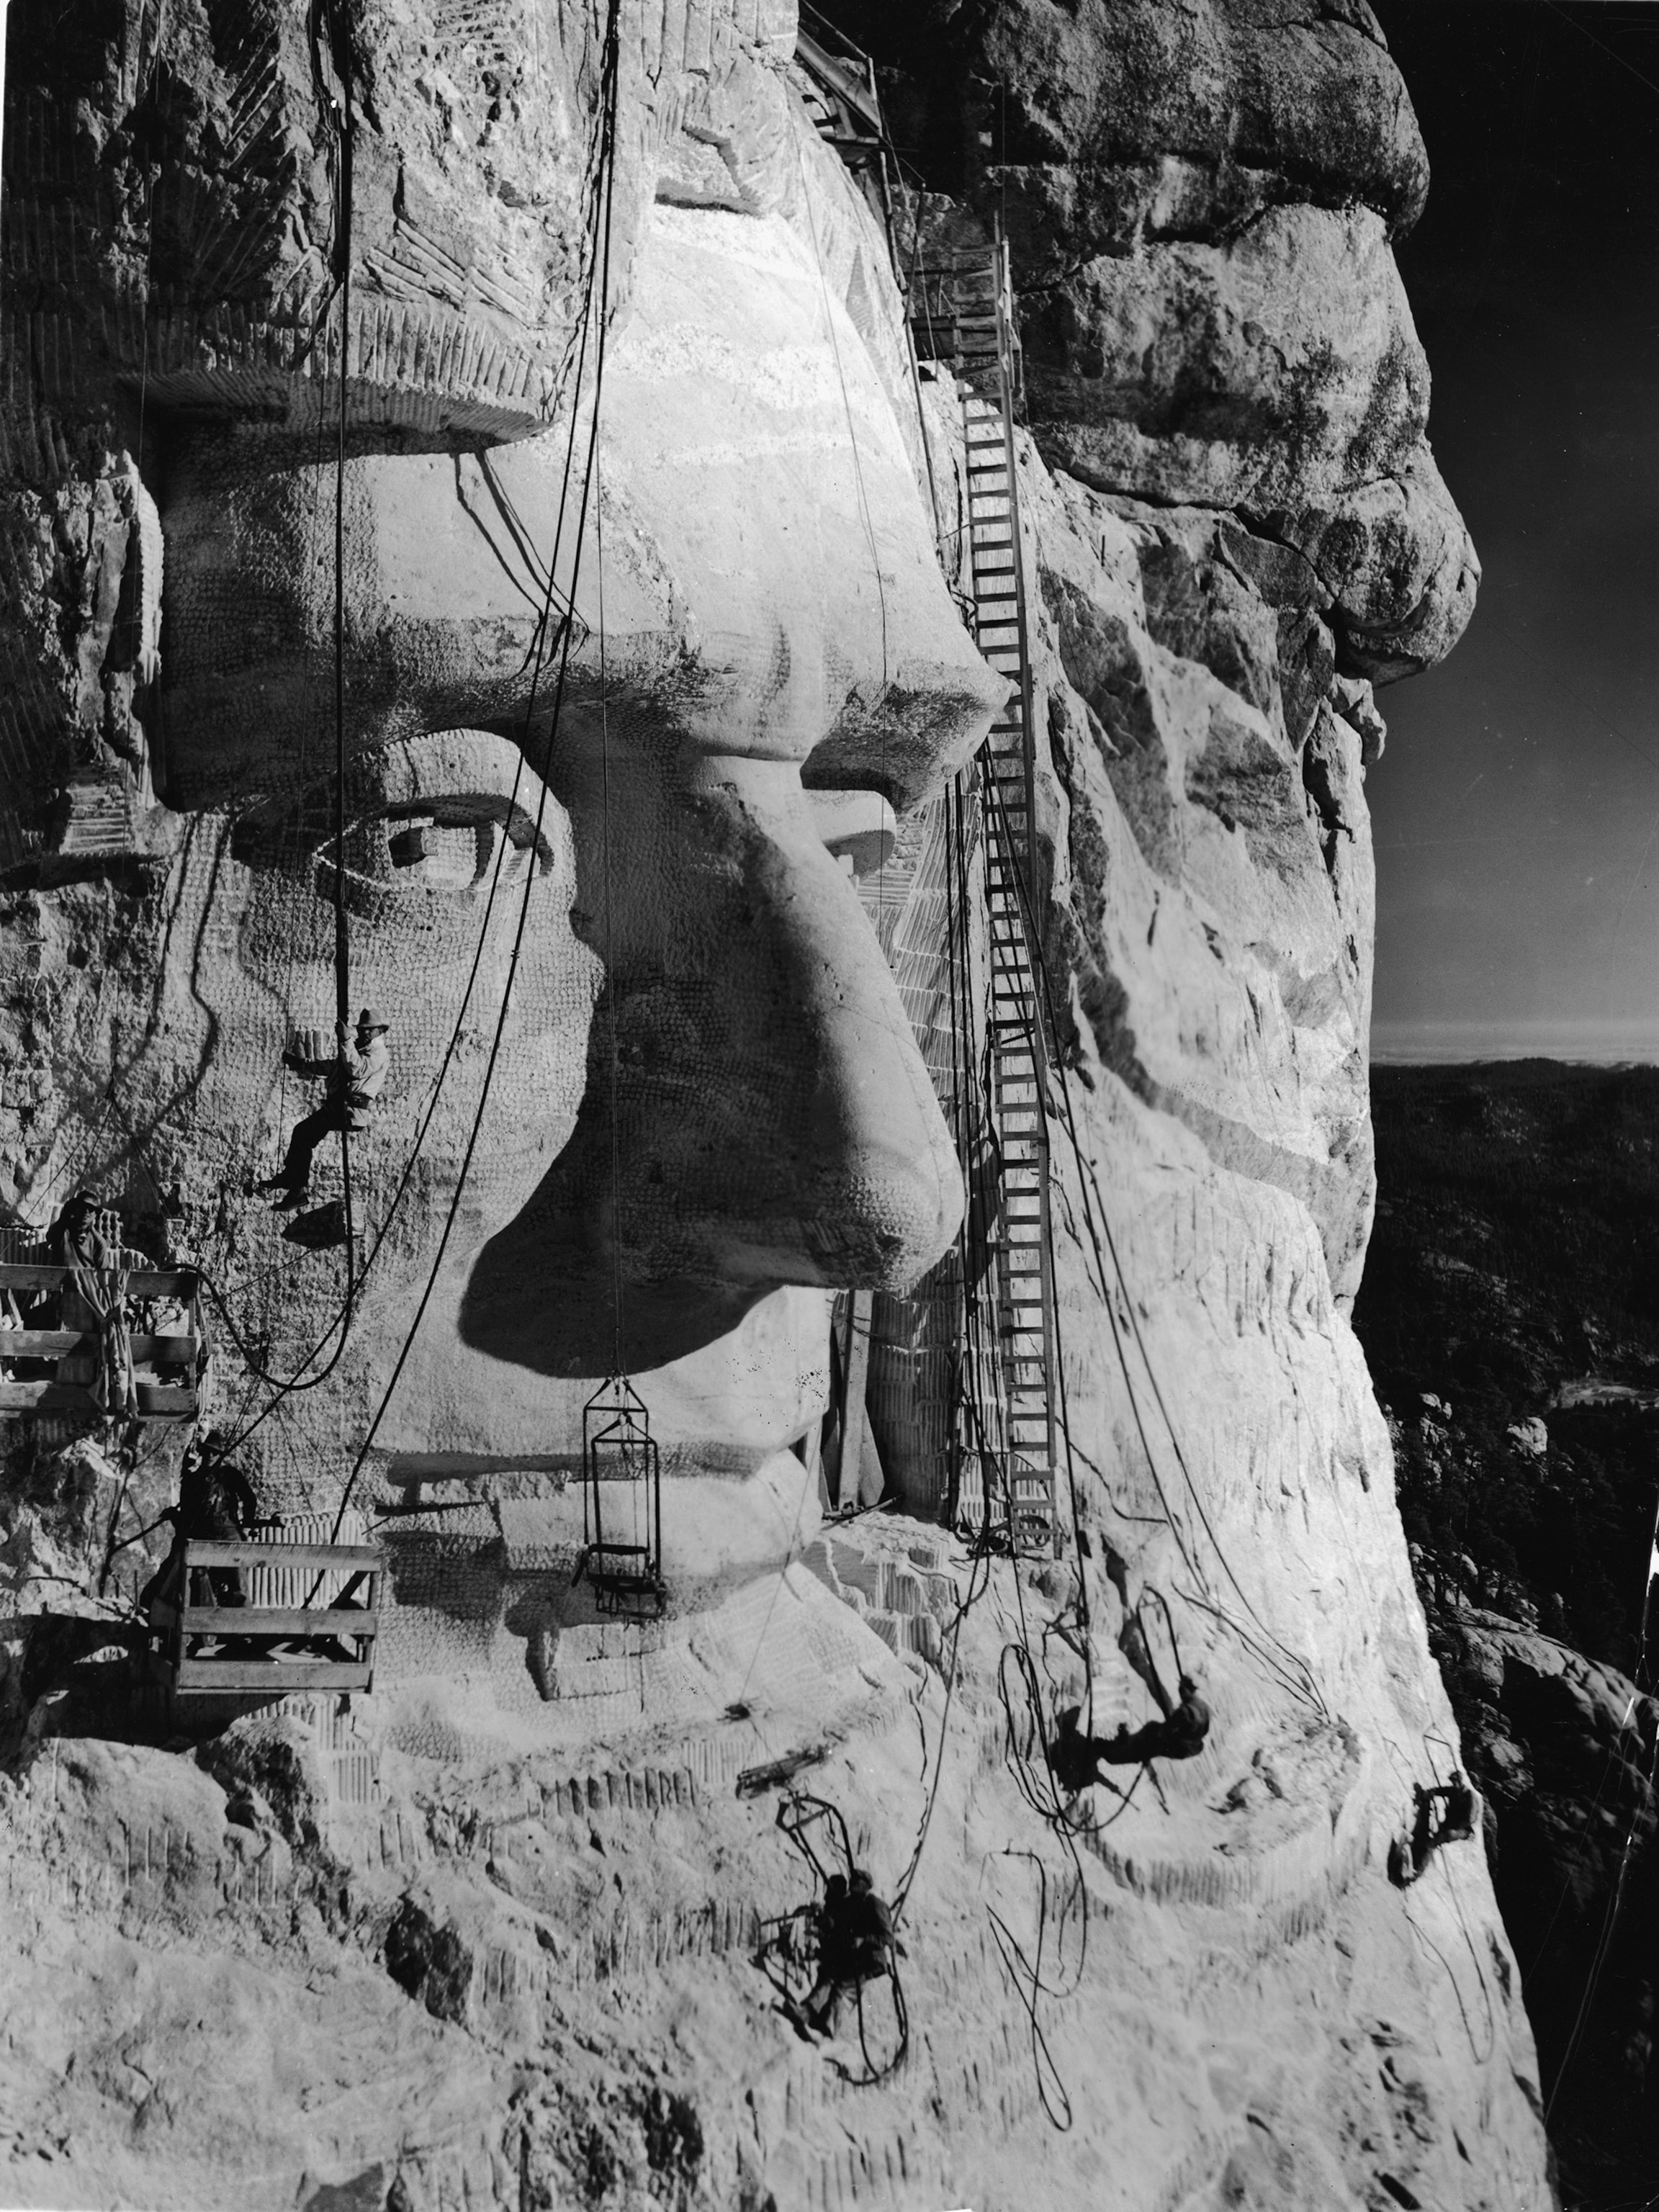 A sculptor hanging from the carving of the head of Abraham Lincoln on Mount Rushmore